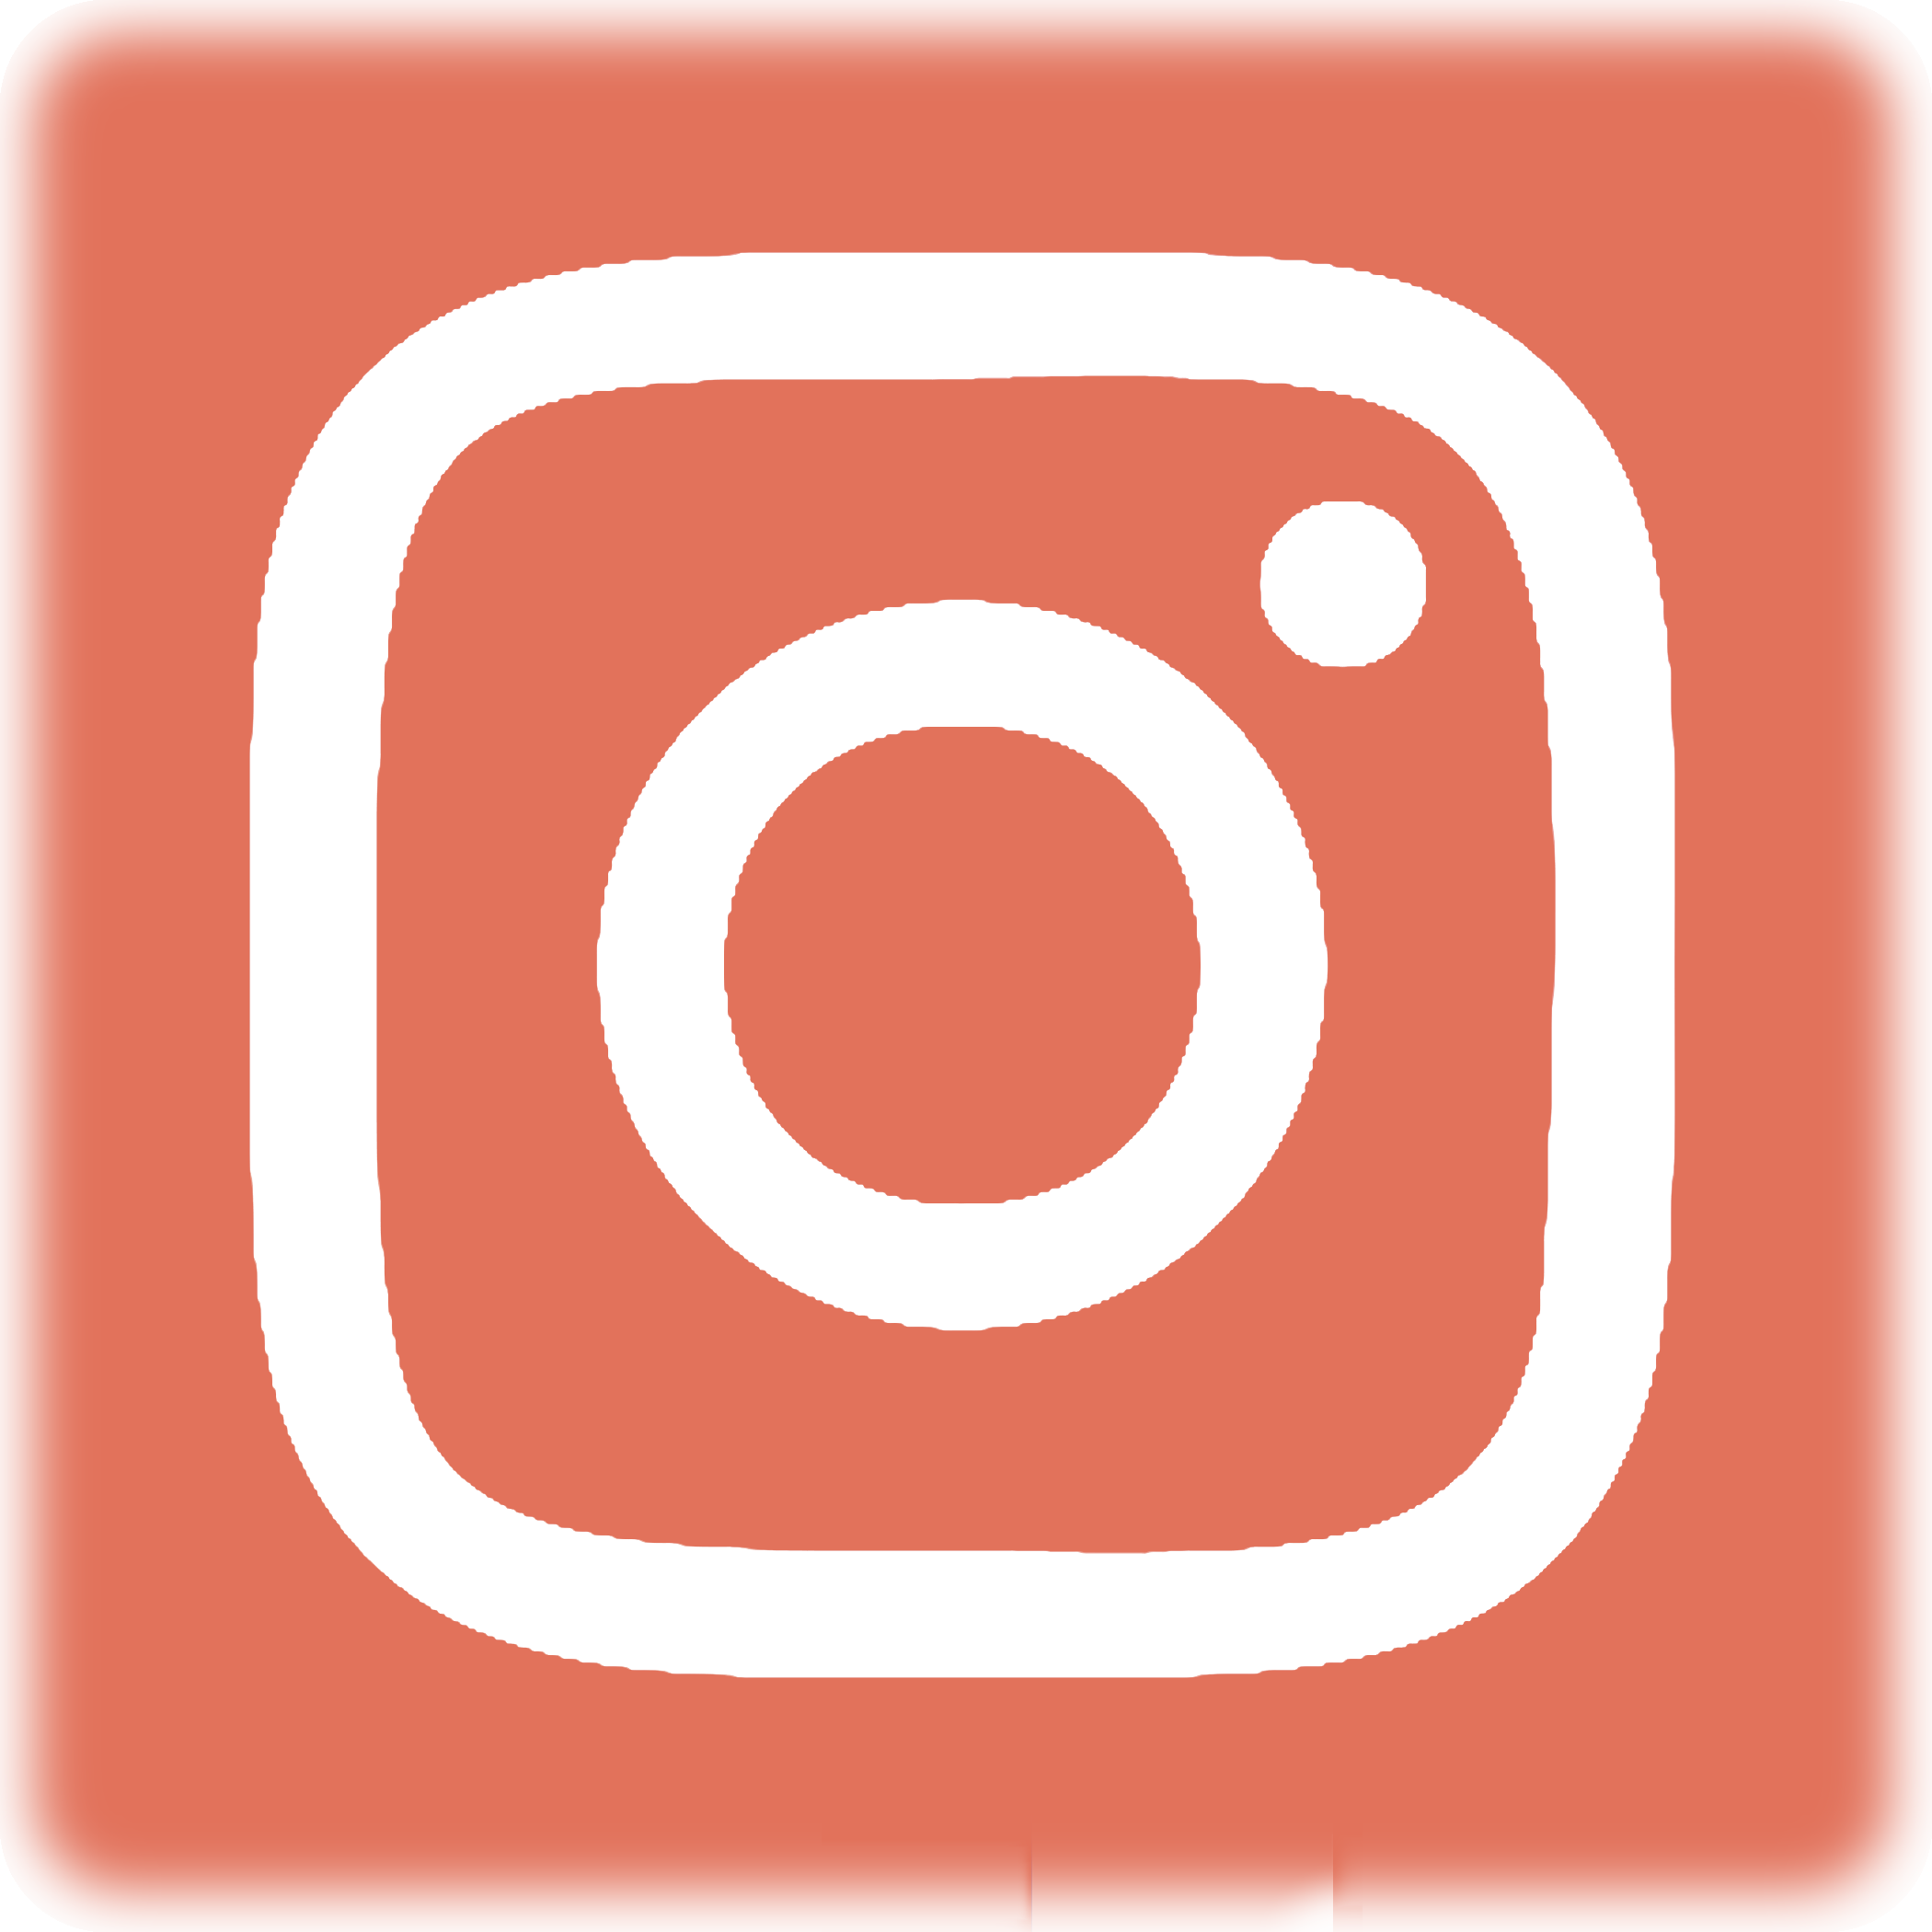 icon-instagram-alta-resolucao.png